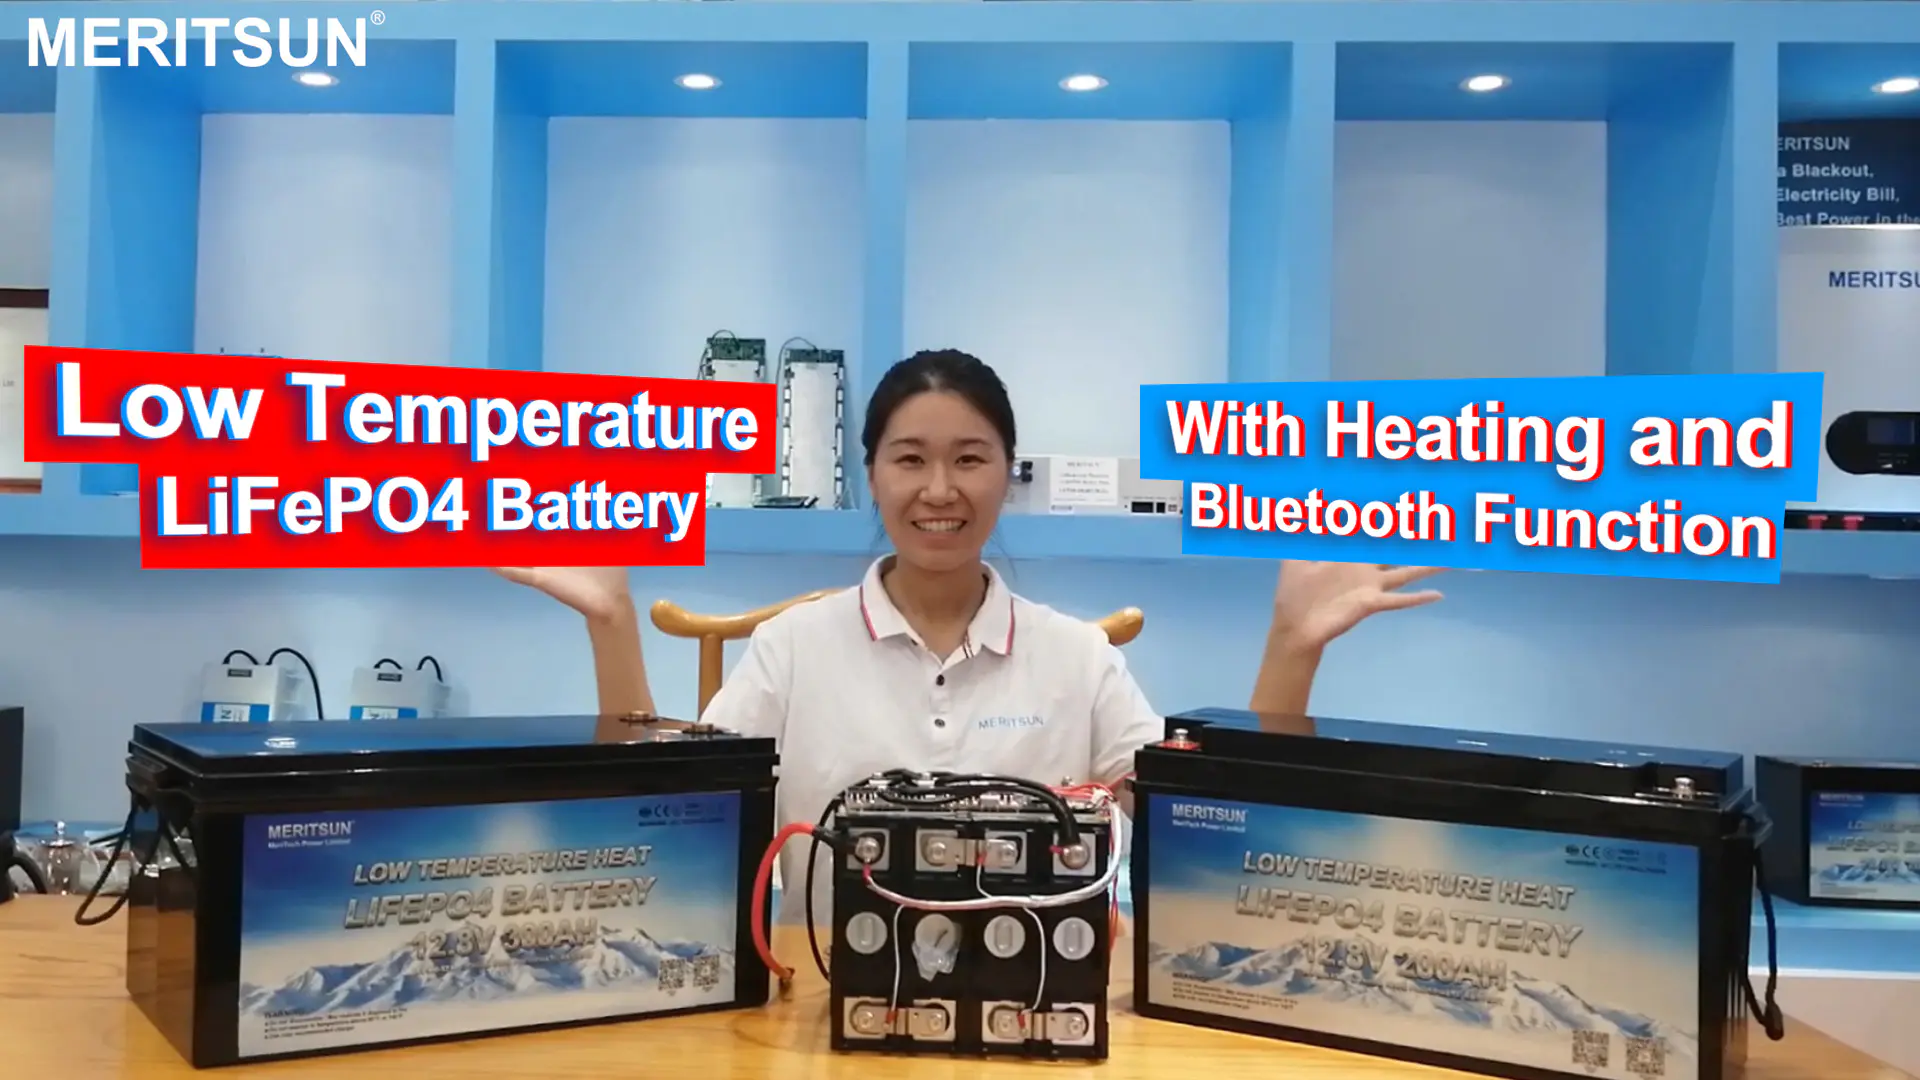 MeritSun Low temperature lithium battery with heating and Bluetooth function